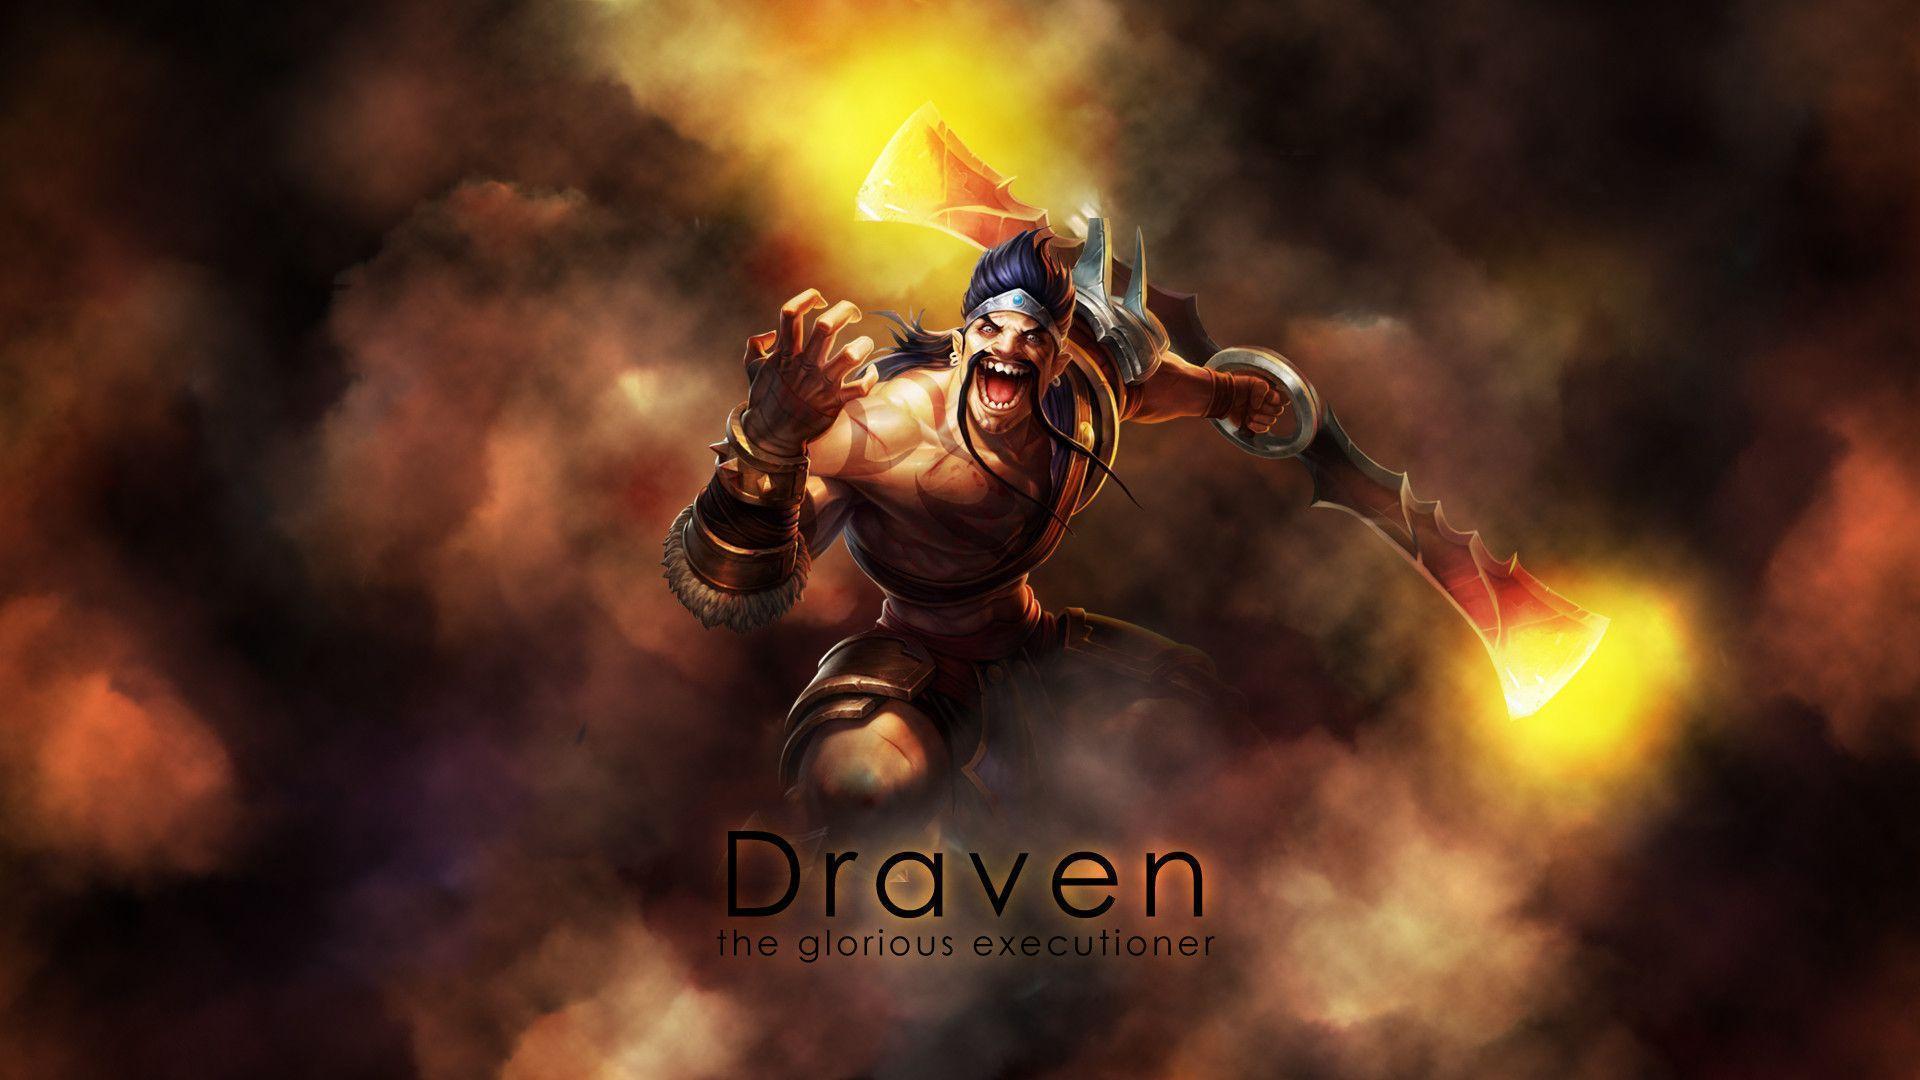 Draven HD Wallpaper And Photo download